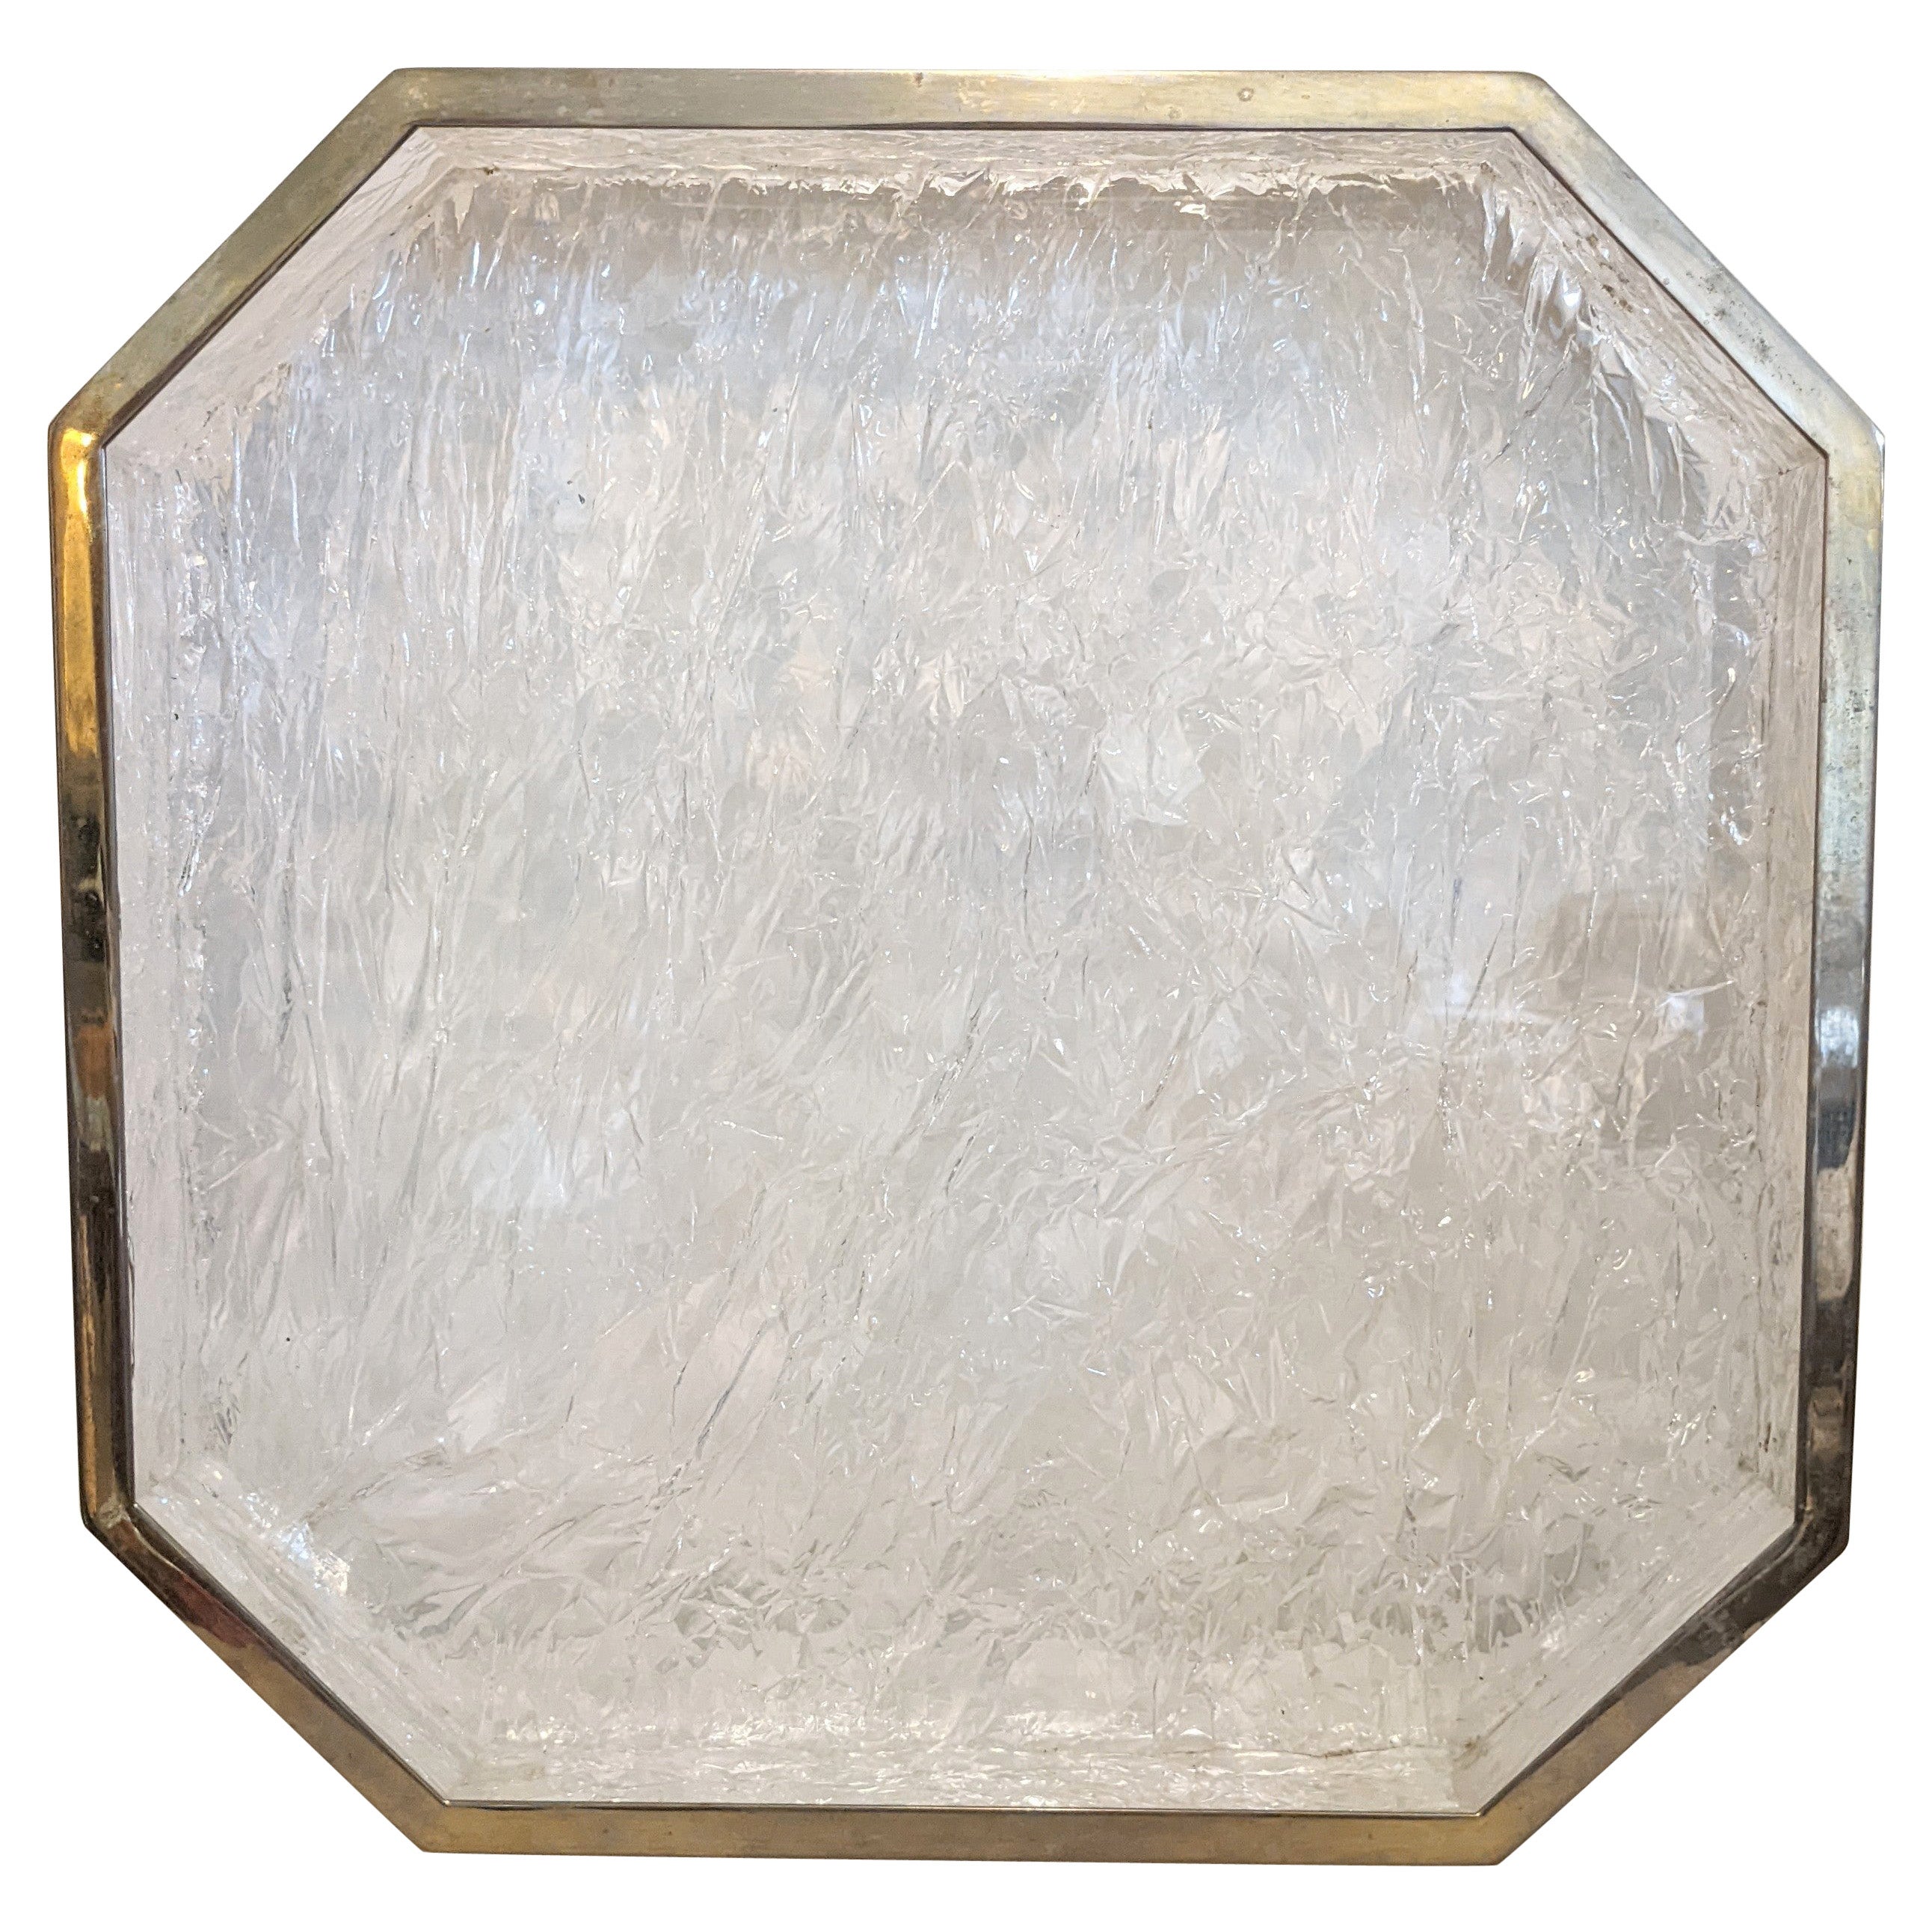 Lucite Crackled Ice Serving Tray, Willy Rizzo Style For Sale